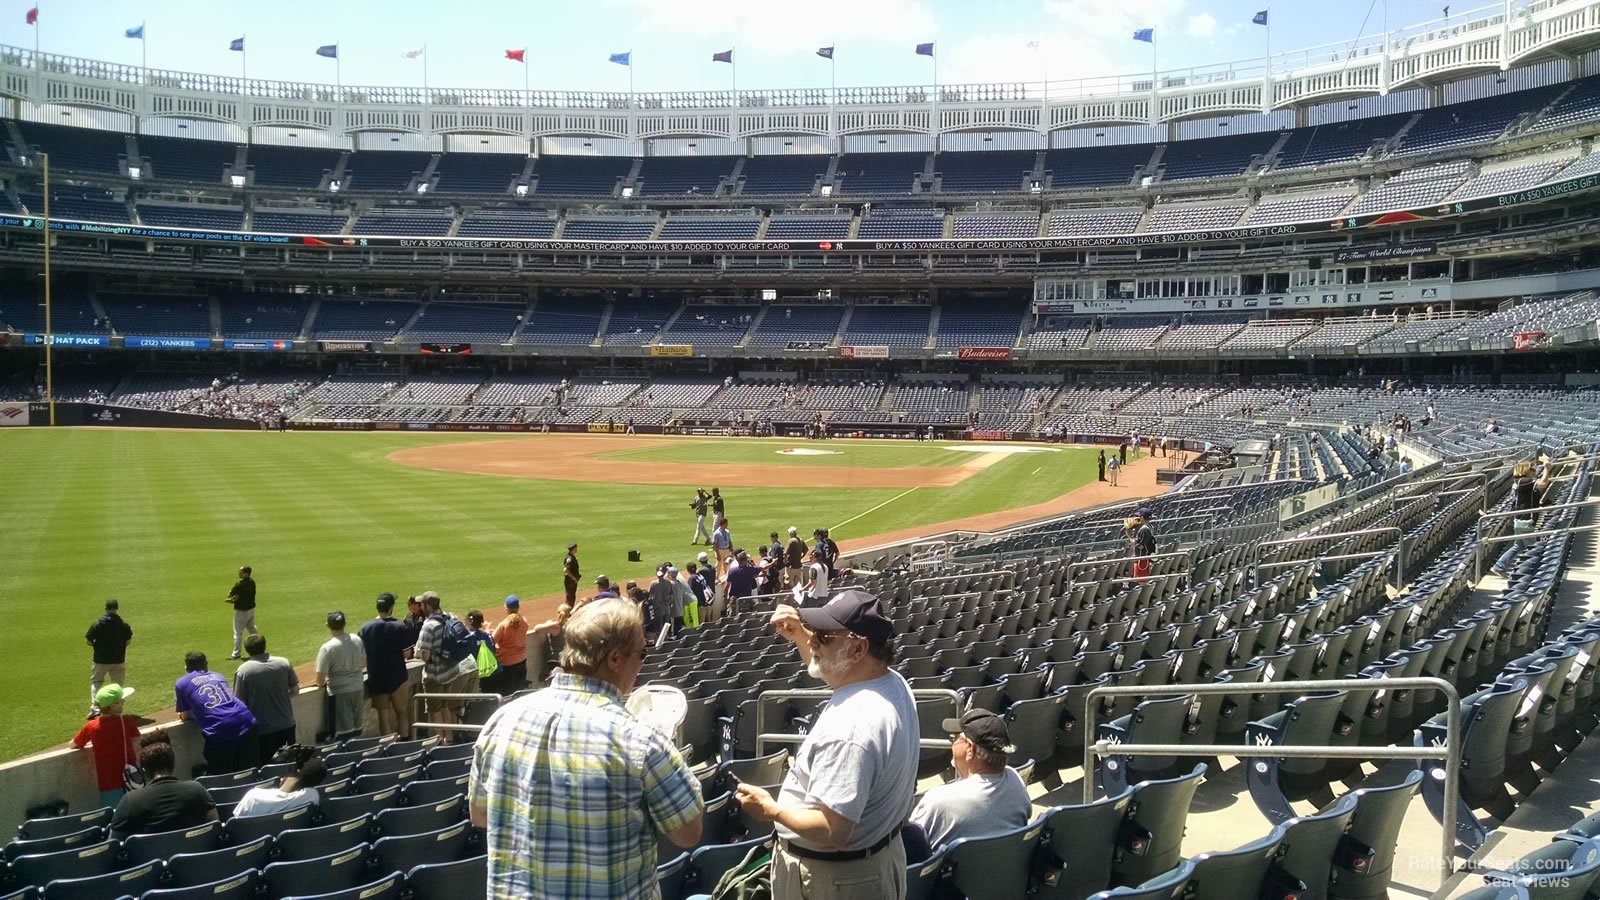 section 131, row 14 seat view  for baseball - yankee stadium